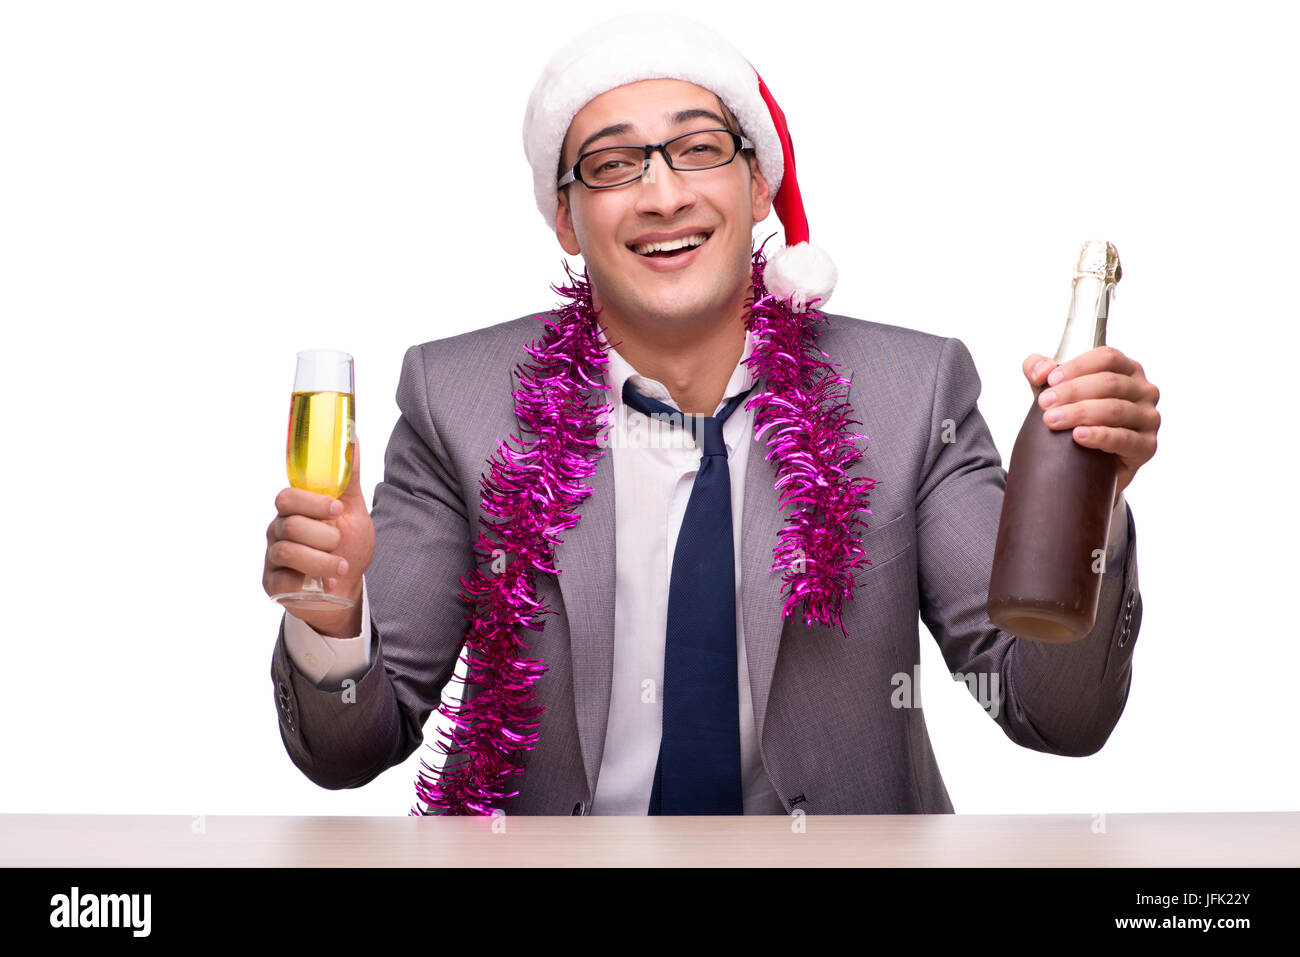 Young businessman celebrating christmas in office Stock Photo